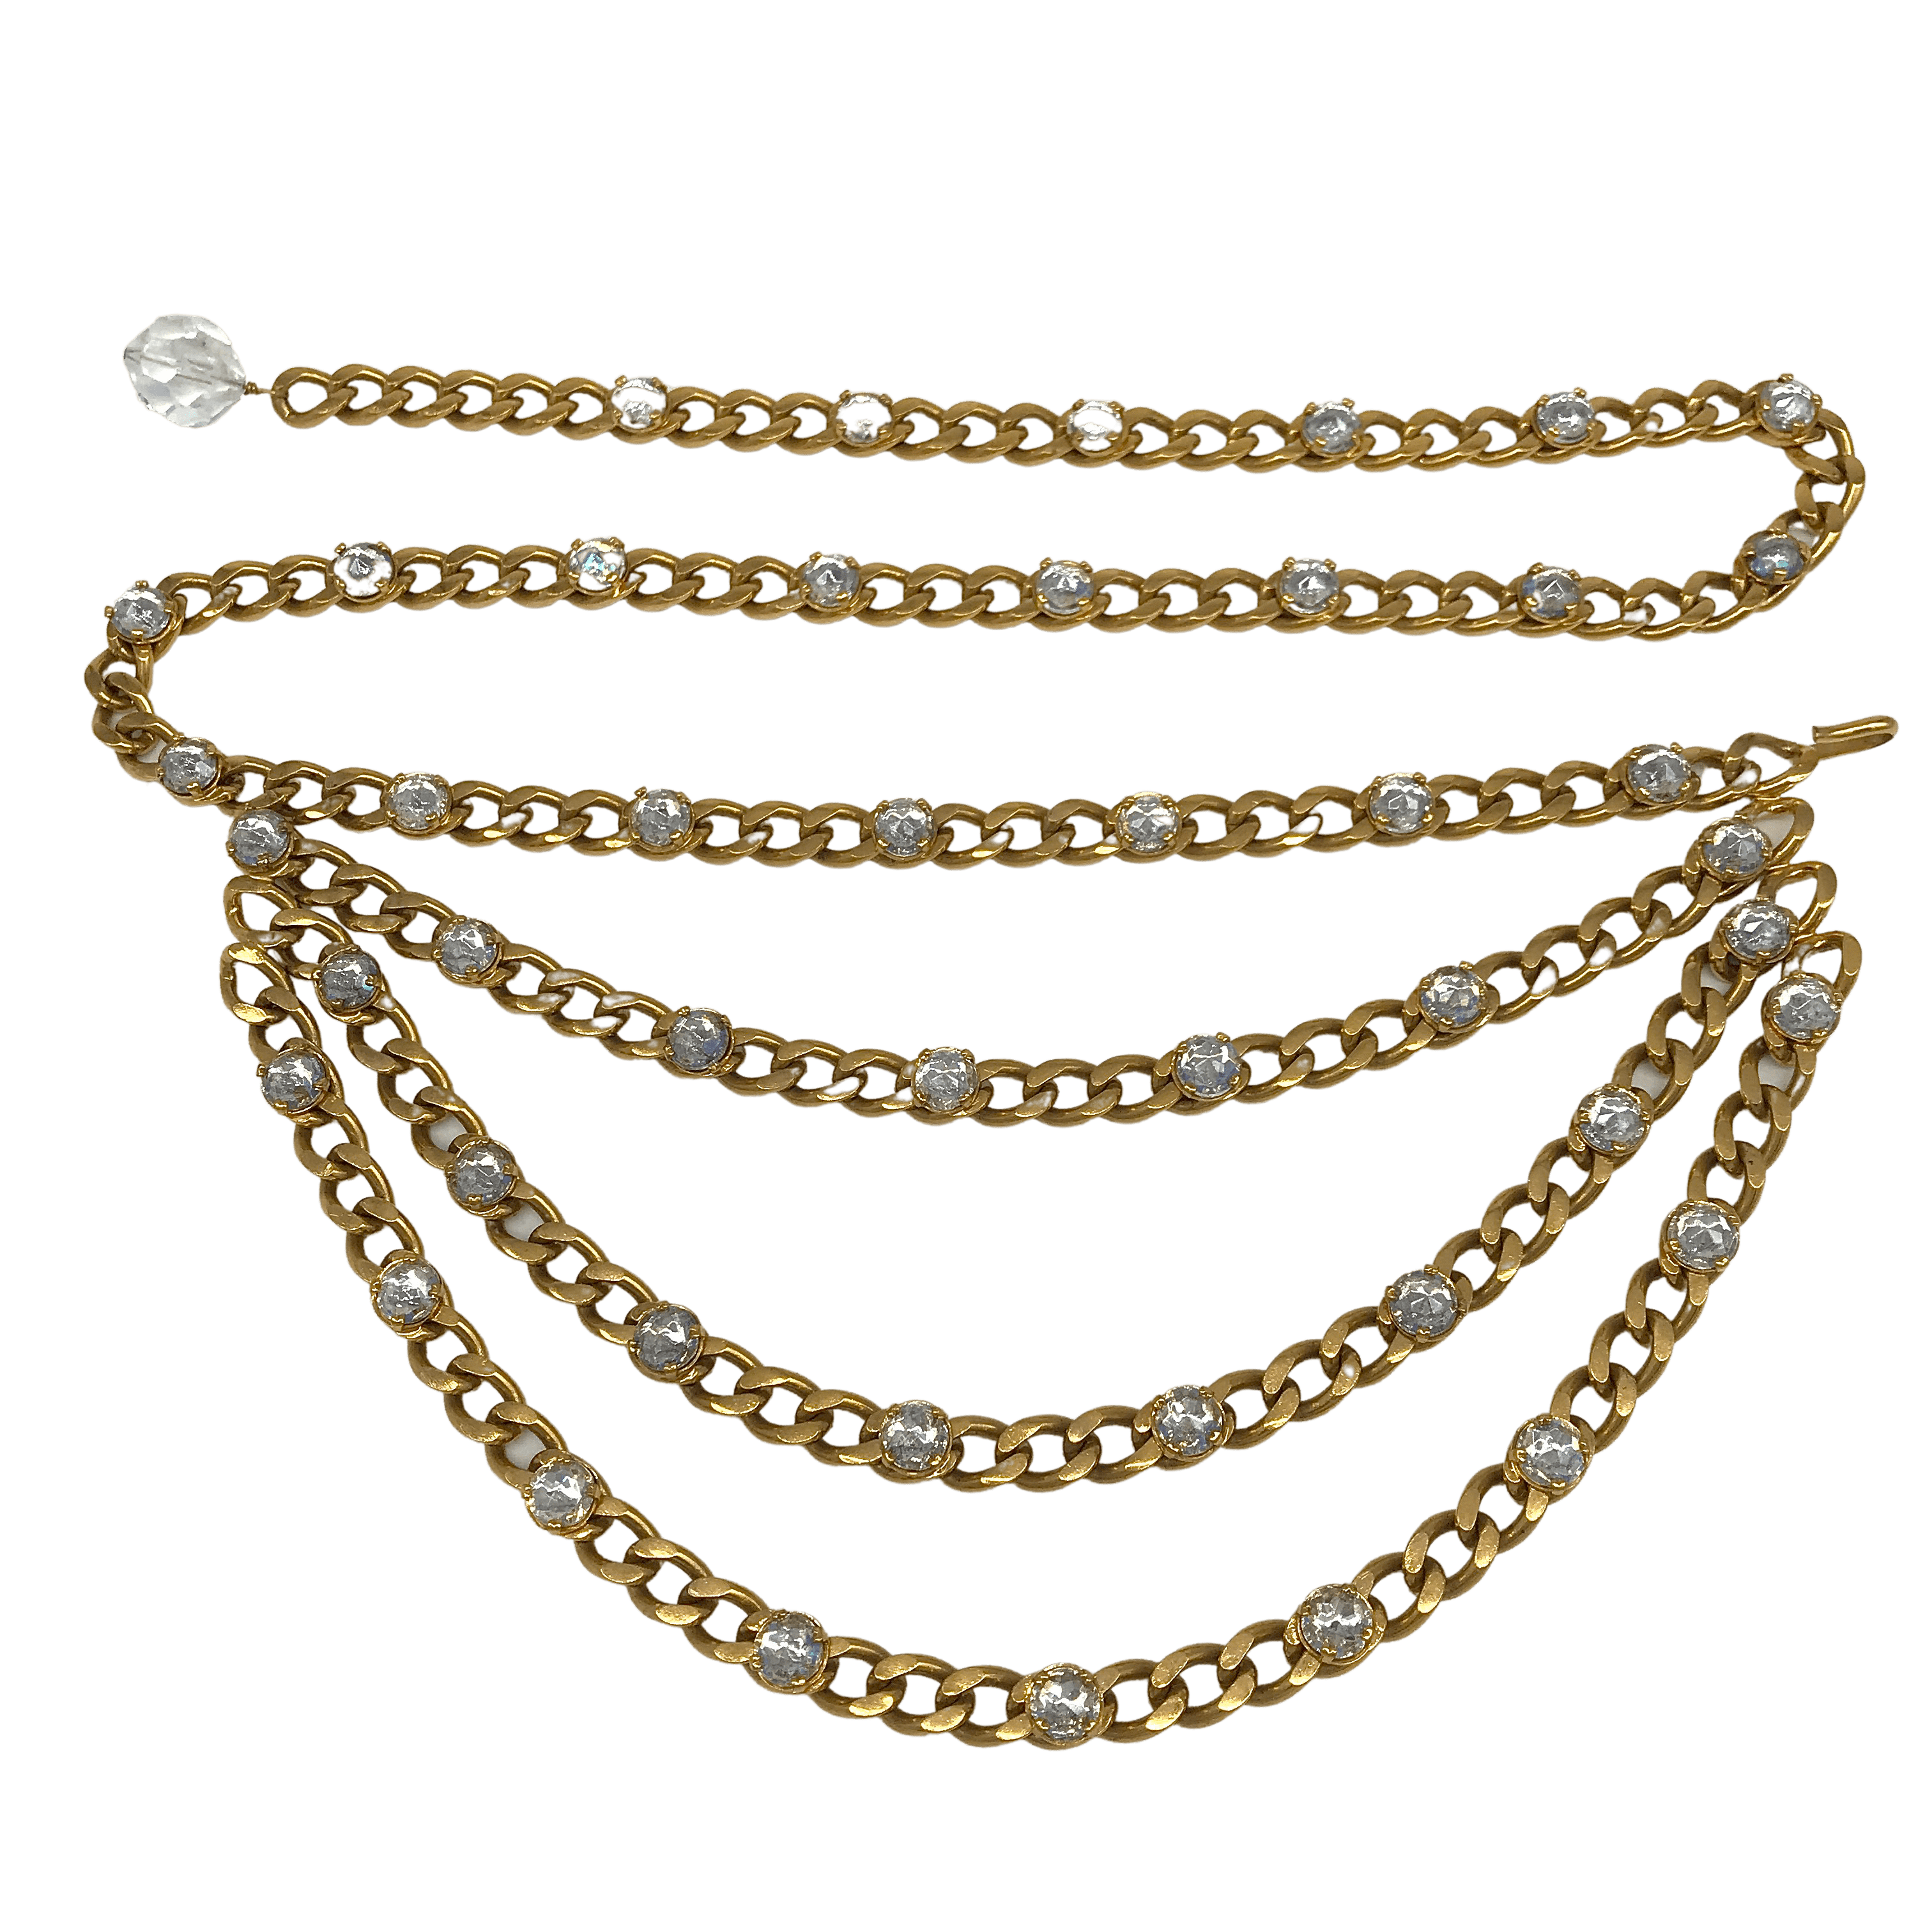 Chanel 1990s CC Charm Chain belt  Rent Chanel jewelry for $195/month